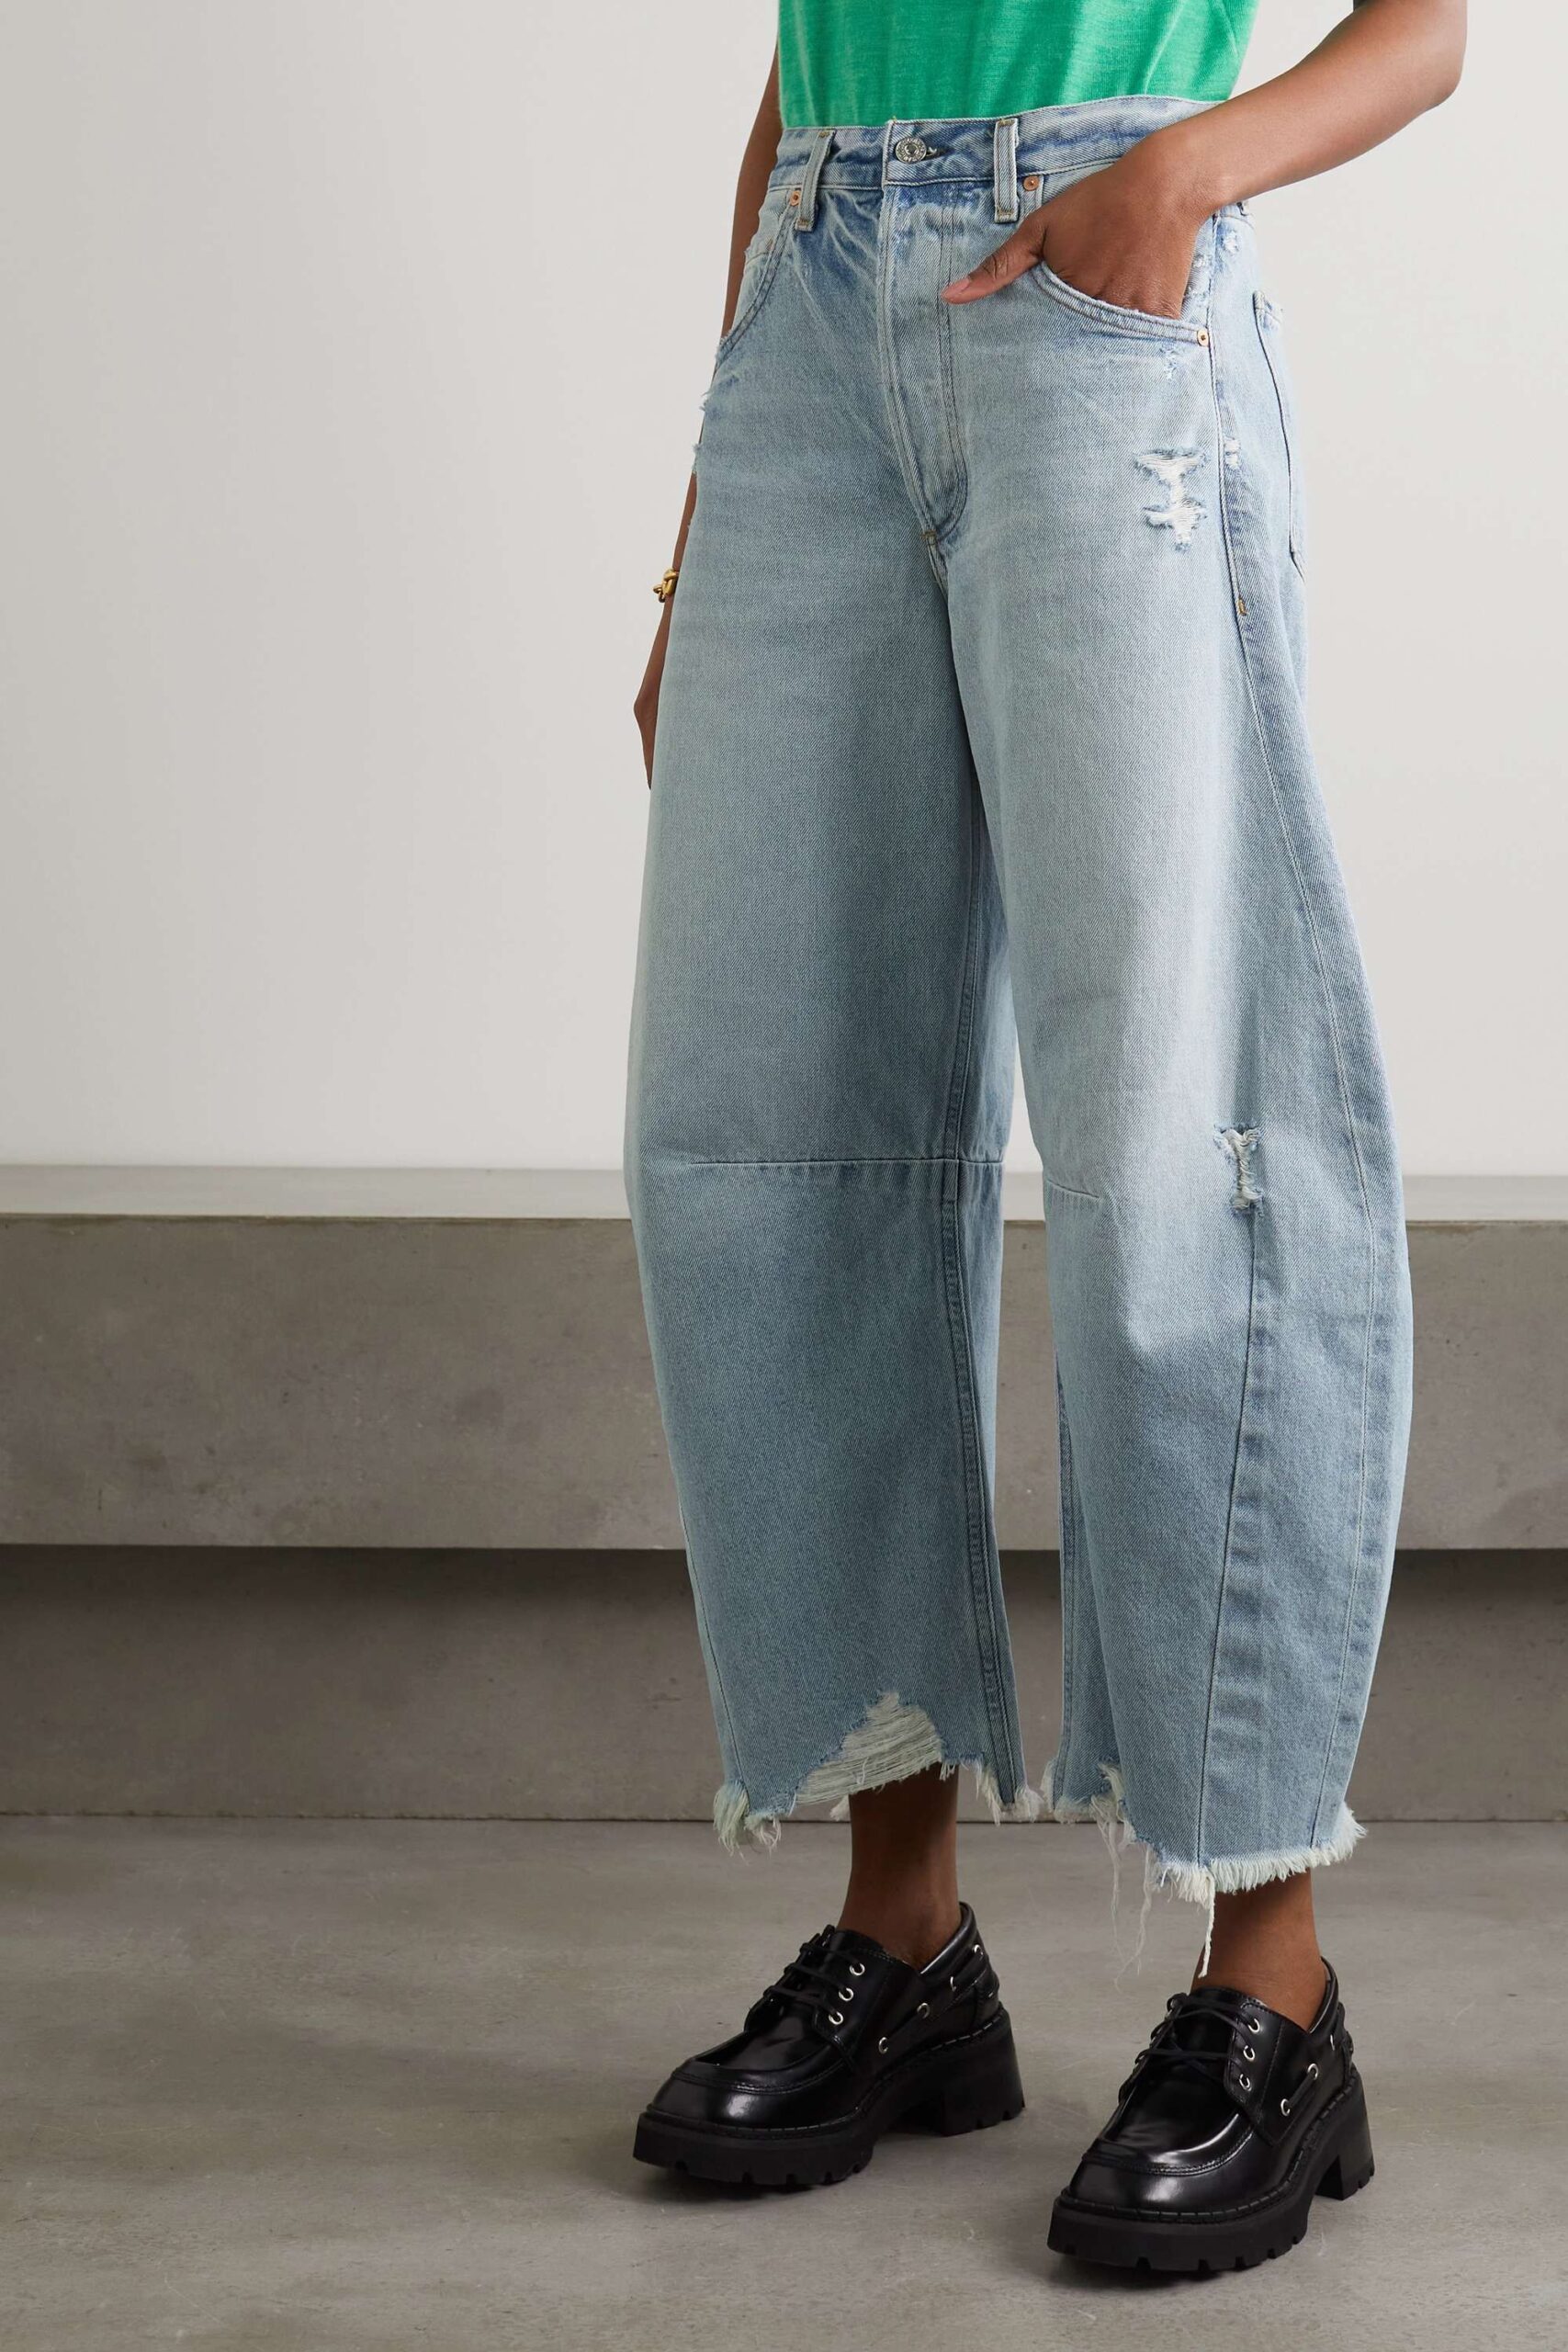 Modern and Stylish: Tapered Jeans for Effortless Cool